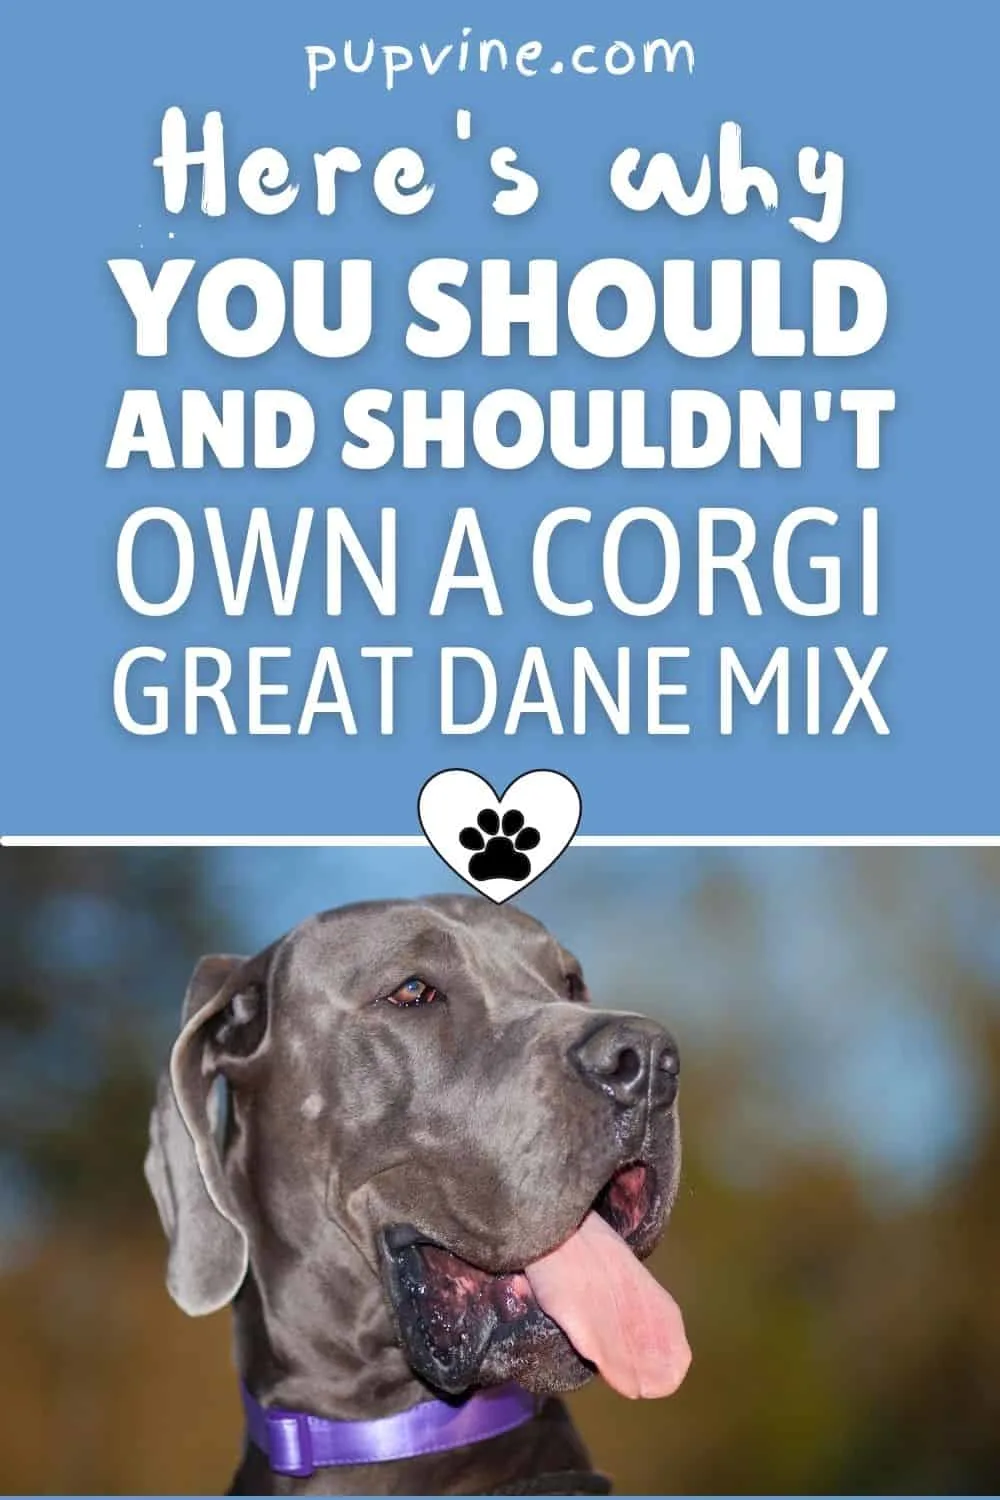 Here's Why You Should And Shouldn't Own A Corgi Great Dane Mix